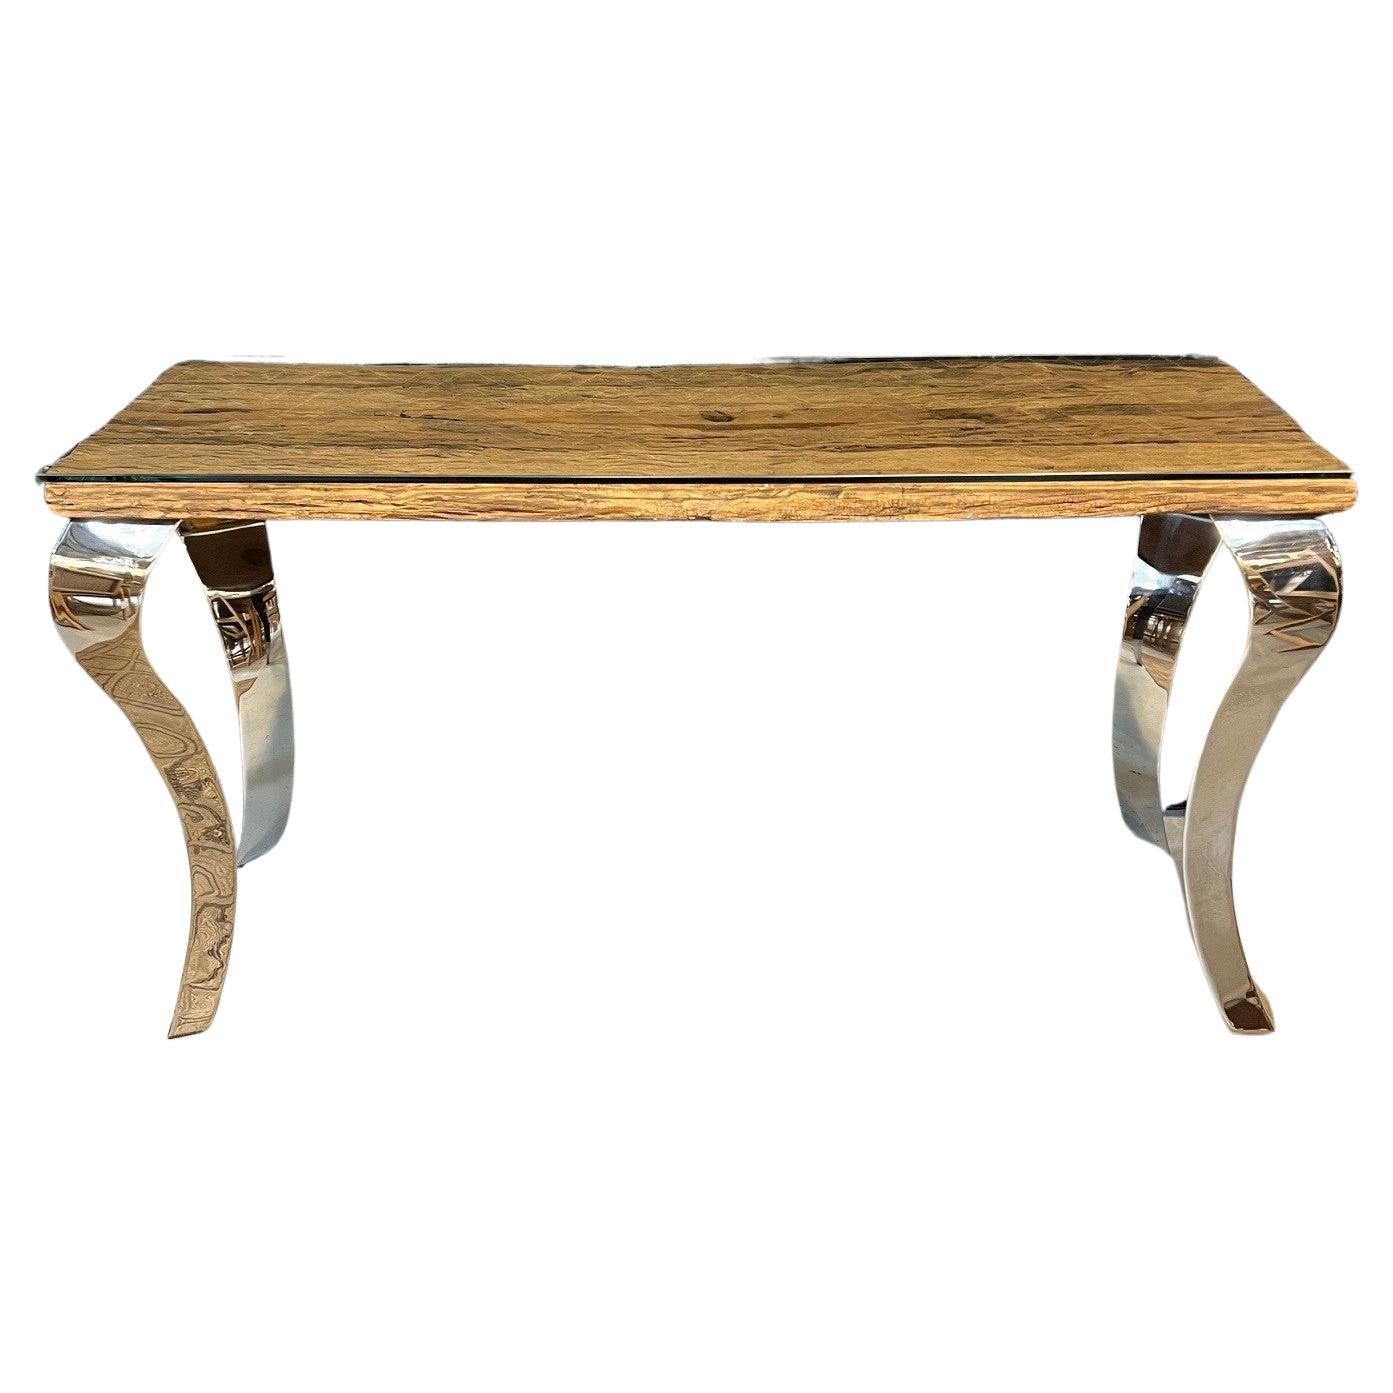 Reclaimed Wood Console Table with Glass Top & Nickel Plated Cabriole Legs